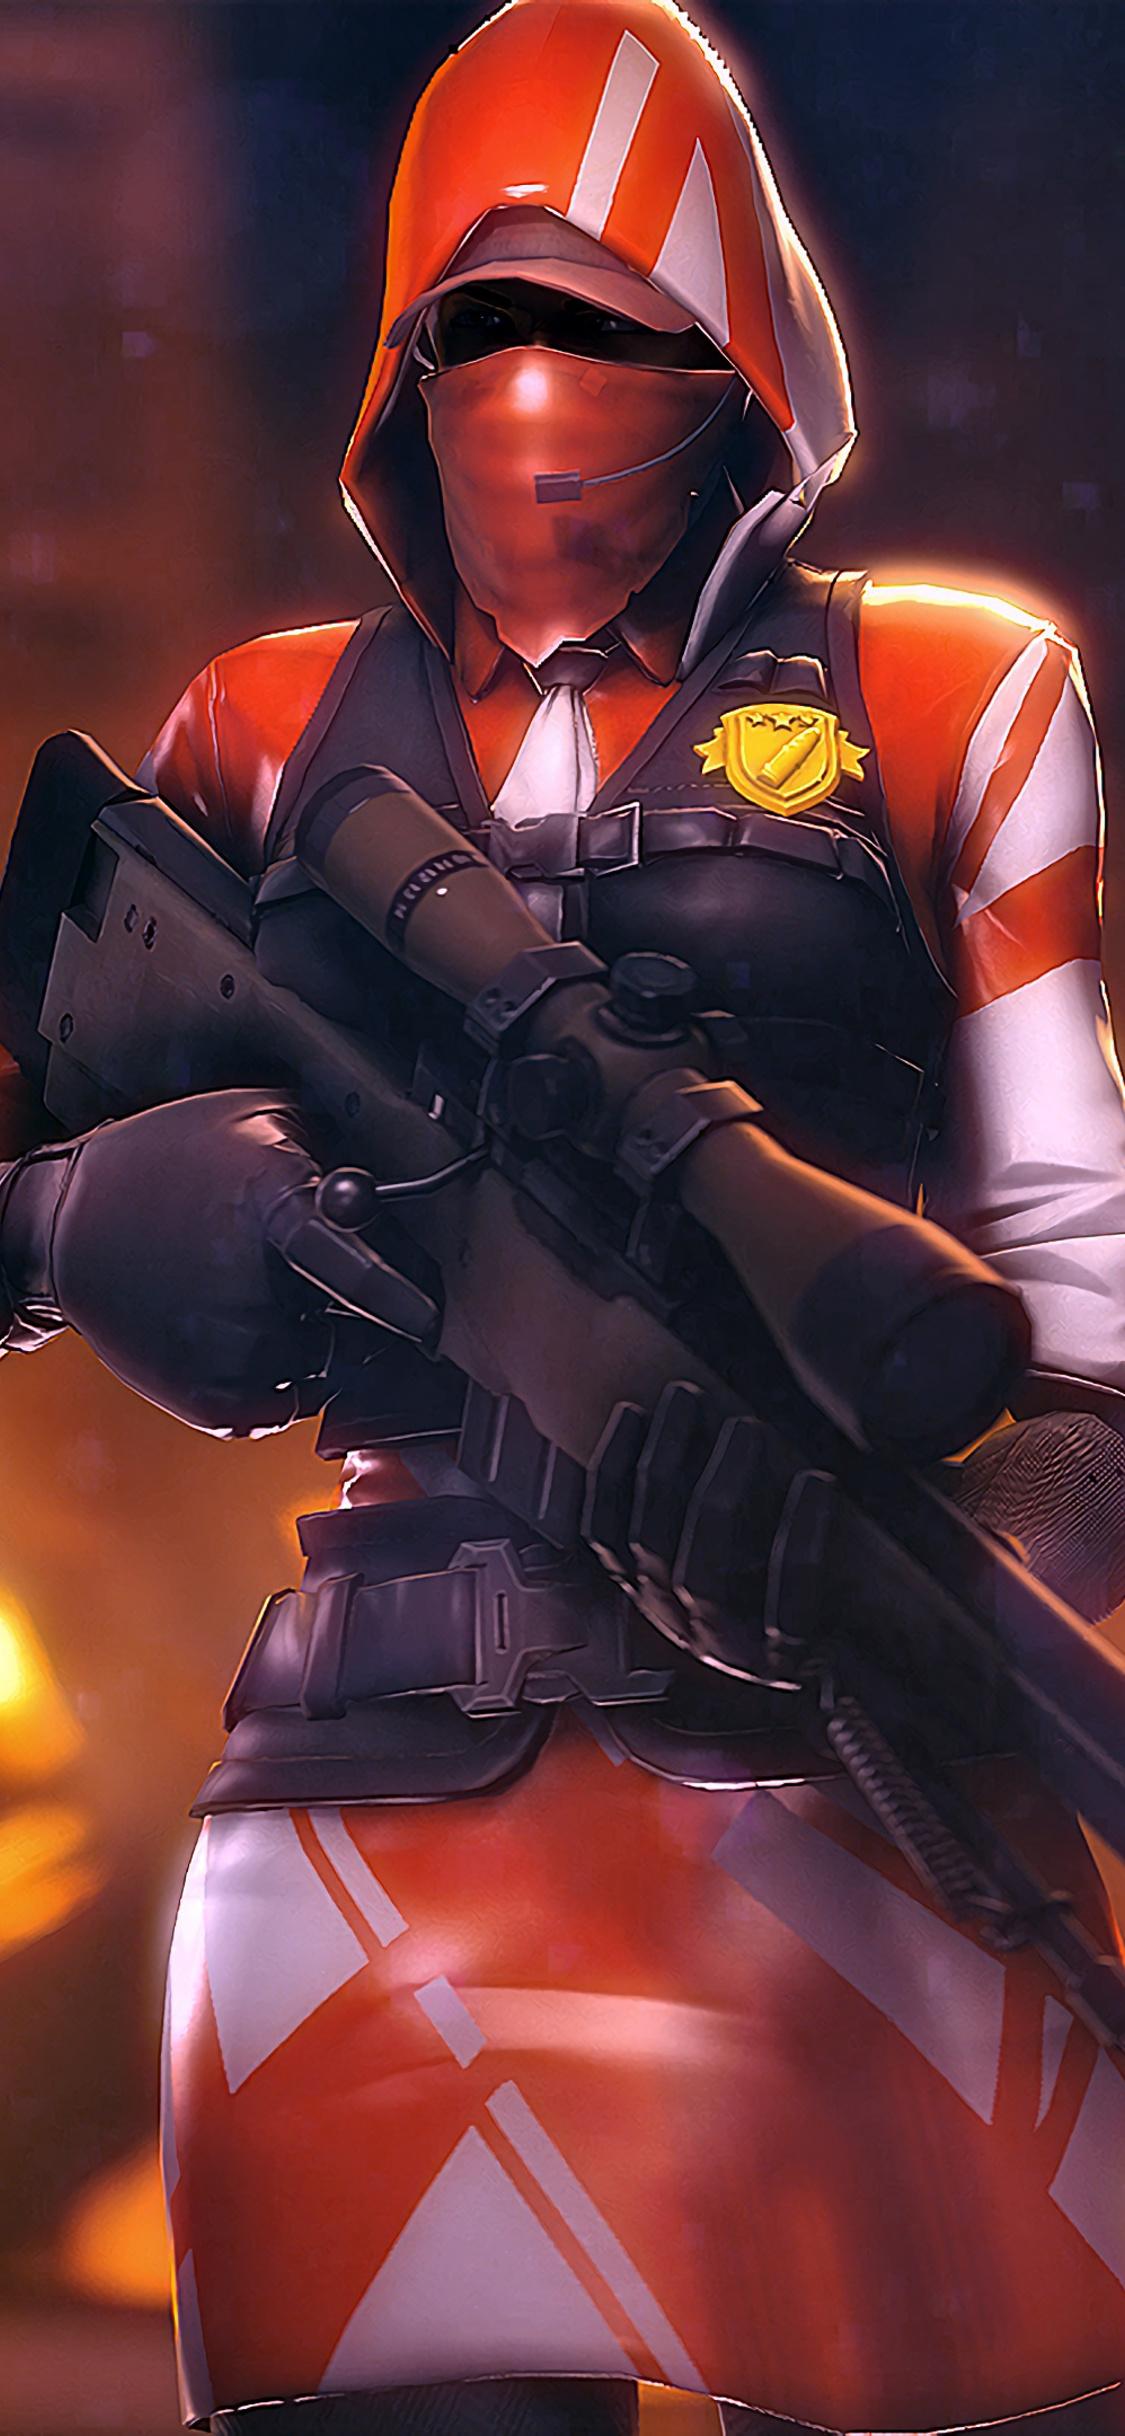 Ace Sniper Outfit Fortnite iPhone Background